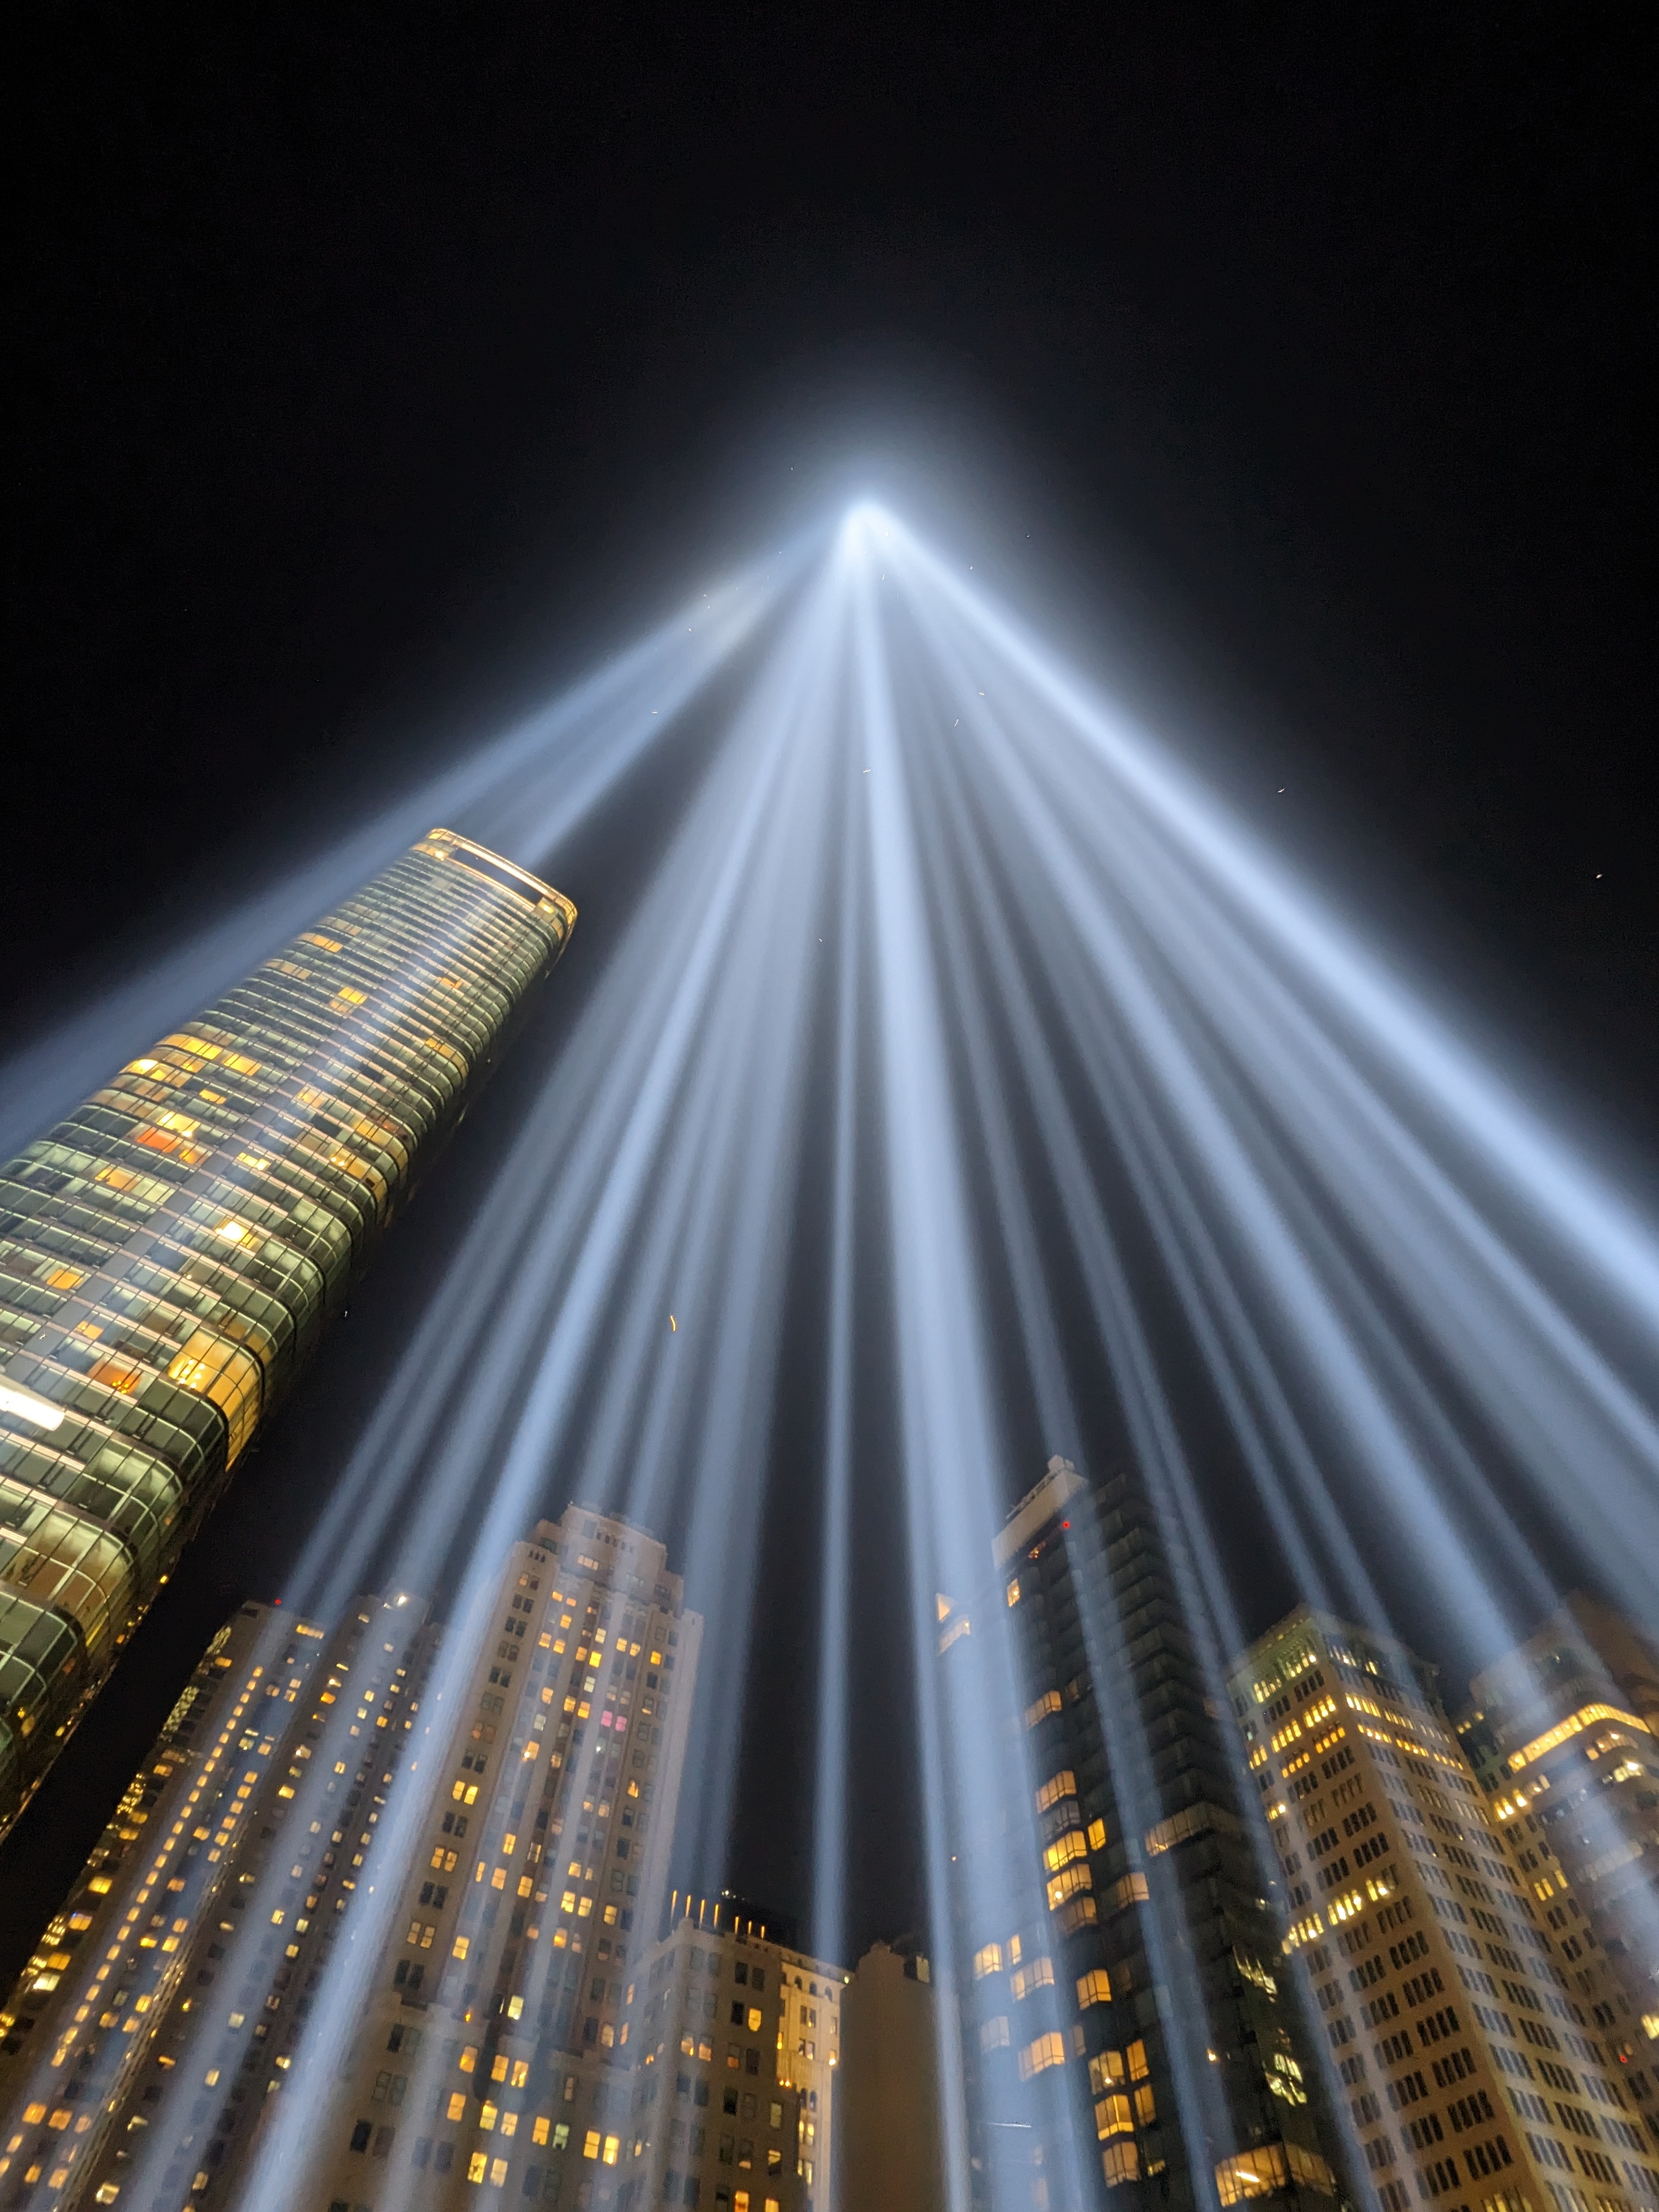 Tribute in Light Memorial commemorates those list during the 9/11 attacks by projecting two beams of light into the sky where the Twin Towers once stood. Photo credit: Roslyn Rivas